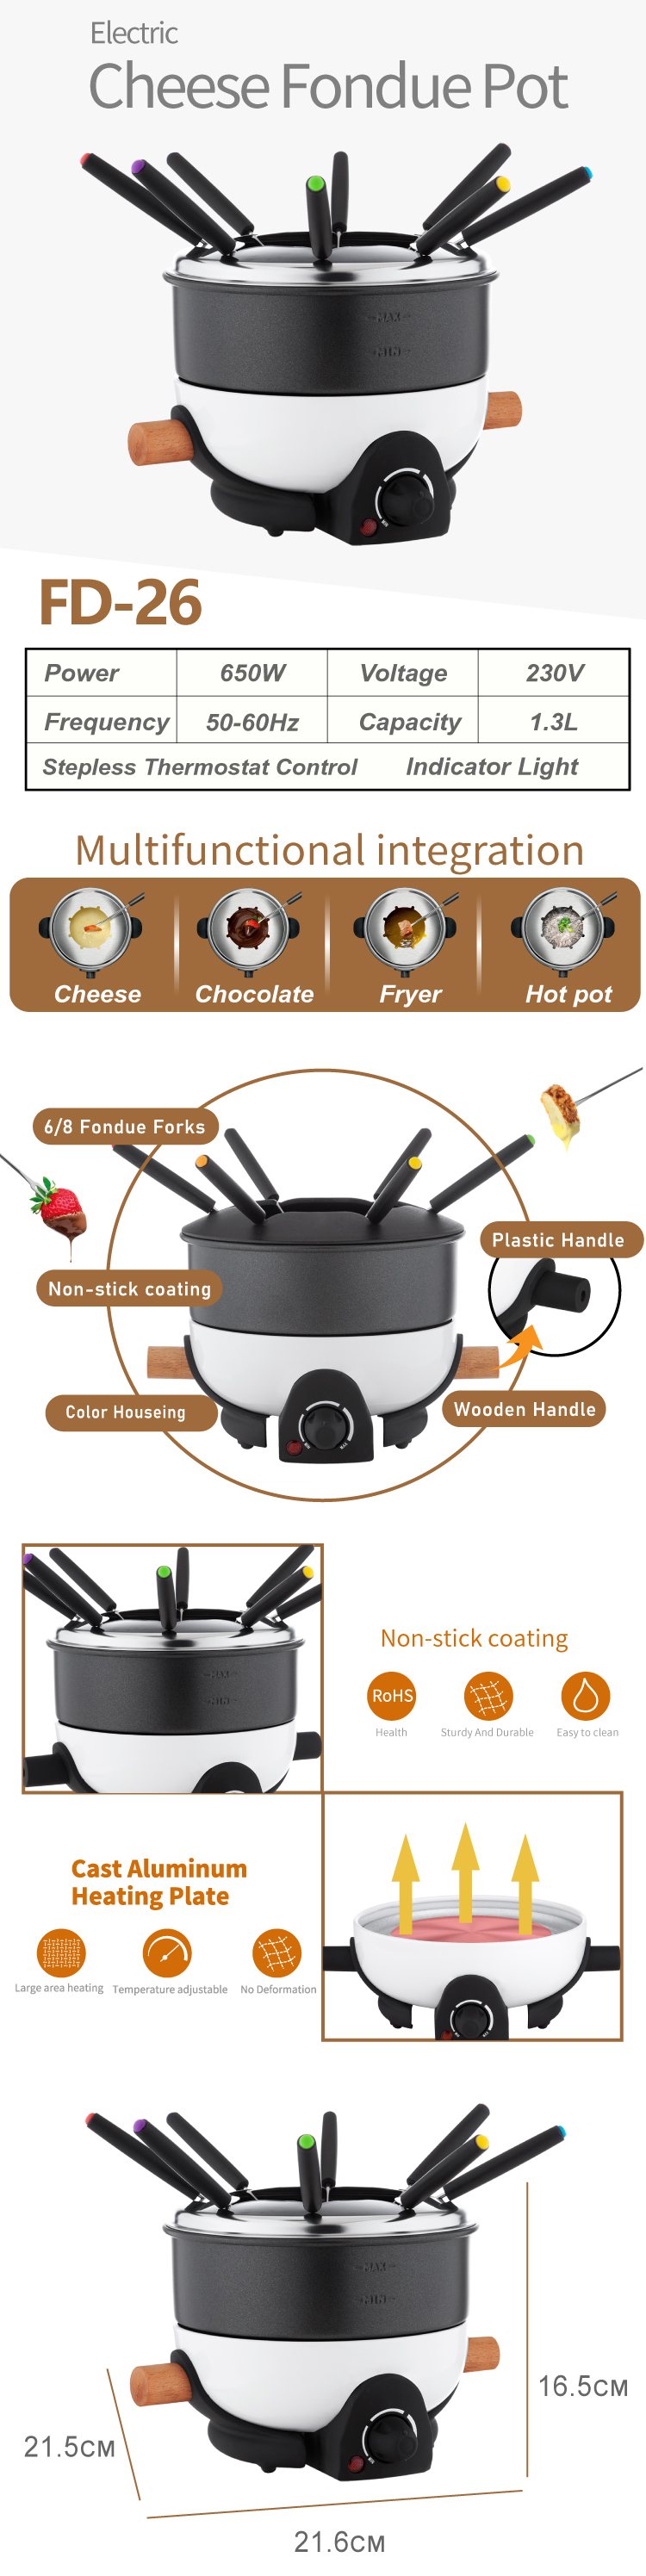 Fondue Set For Wooden Handle And 8 Forks 1